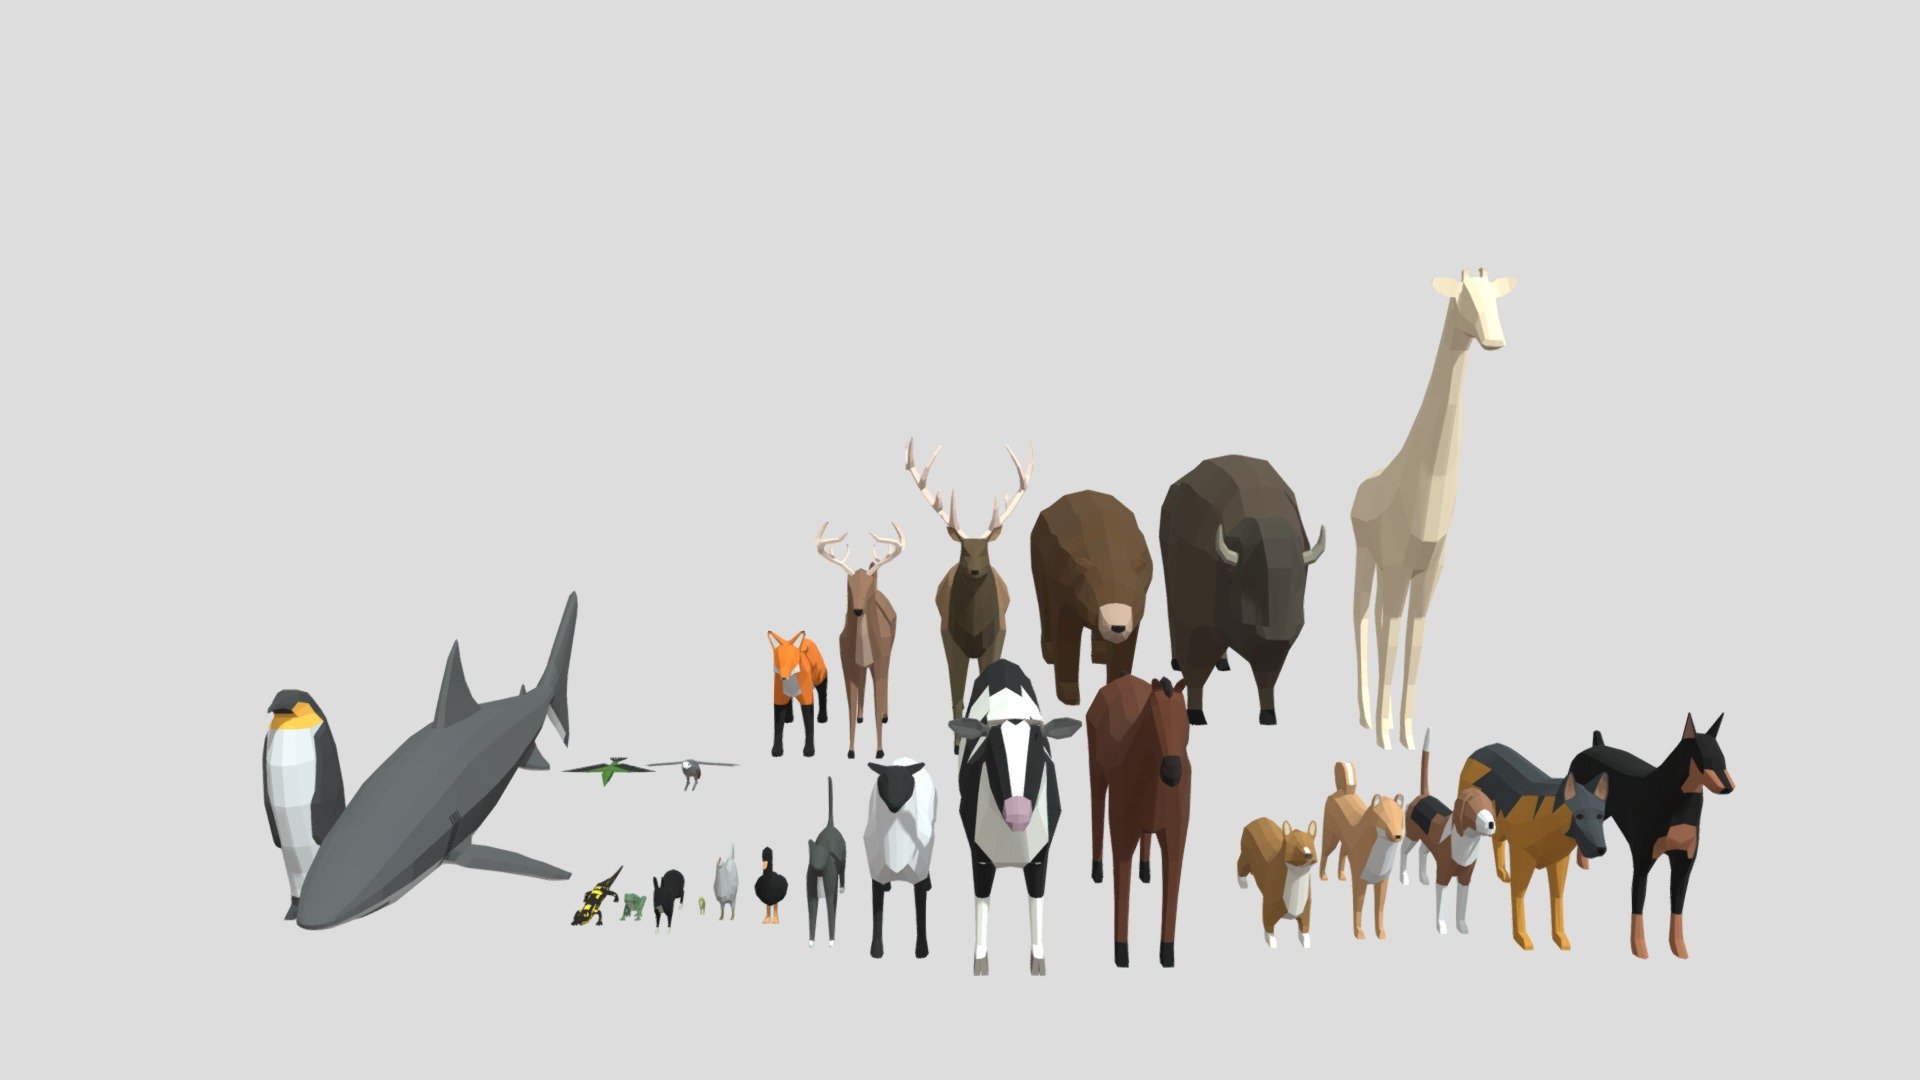 25 unique low poly animals made in blender. All objects have one texture. Can be used for games, animations, and more
Includes : 3d model, uv unwrap, bake simple color and original blender file with final animals (and animals that dont have modifiers applied)
textures and all files are in rar file
File Format : FBX, OBJ, STL, DAE
Why are my textures see through blender?
To fix that problem, go into the Material Settings and check if the Blend Mode is on Alpha Blend. If it is then switch it to Opaque.
Some files may need textures adjusted or added depending on the program there imported into 3d model